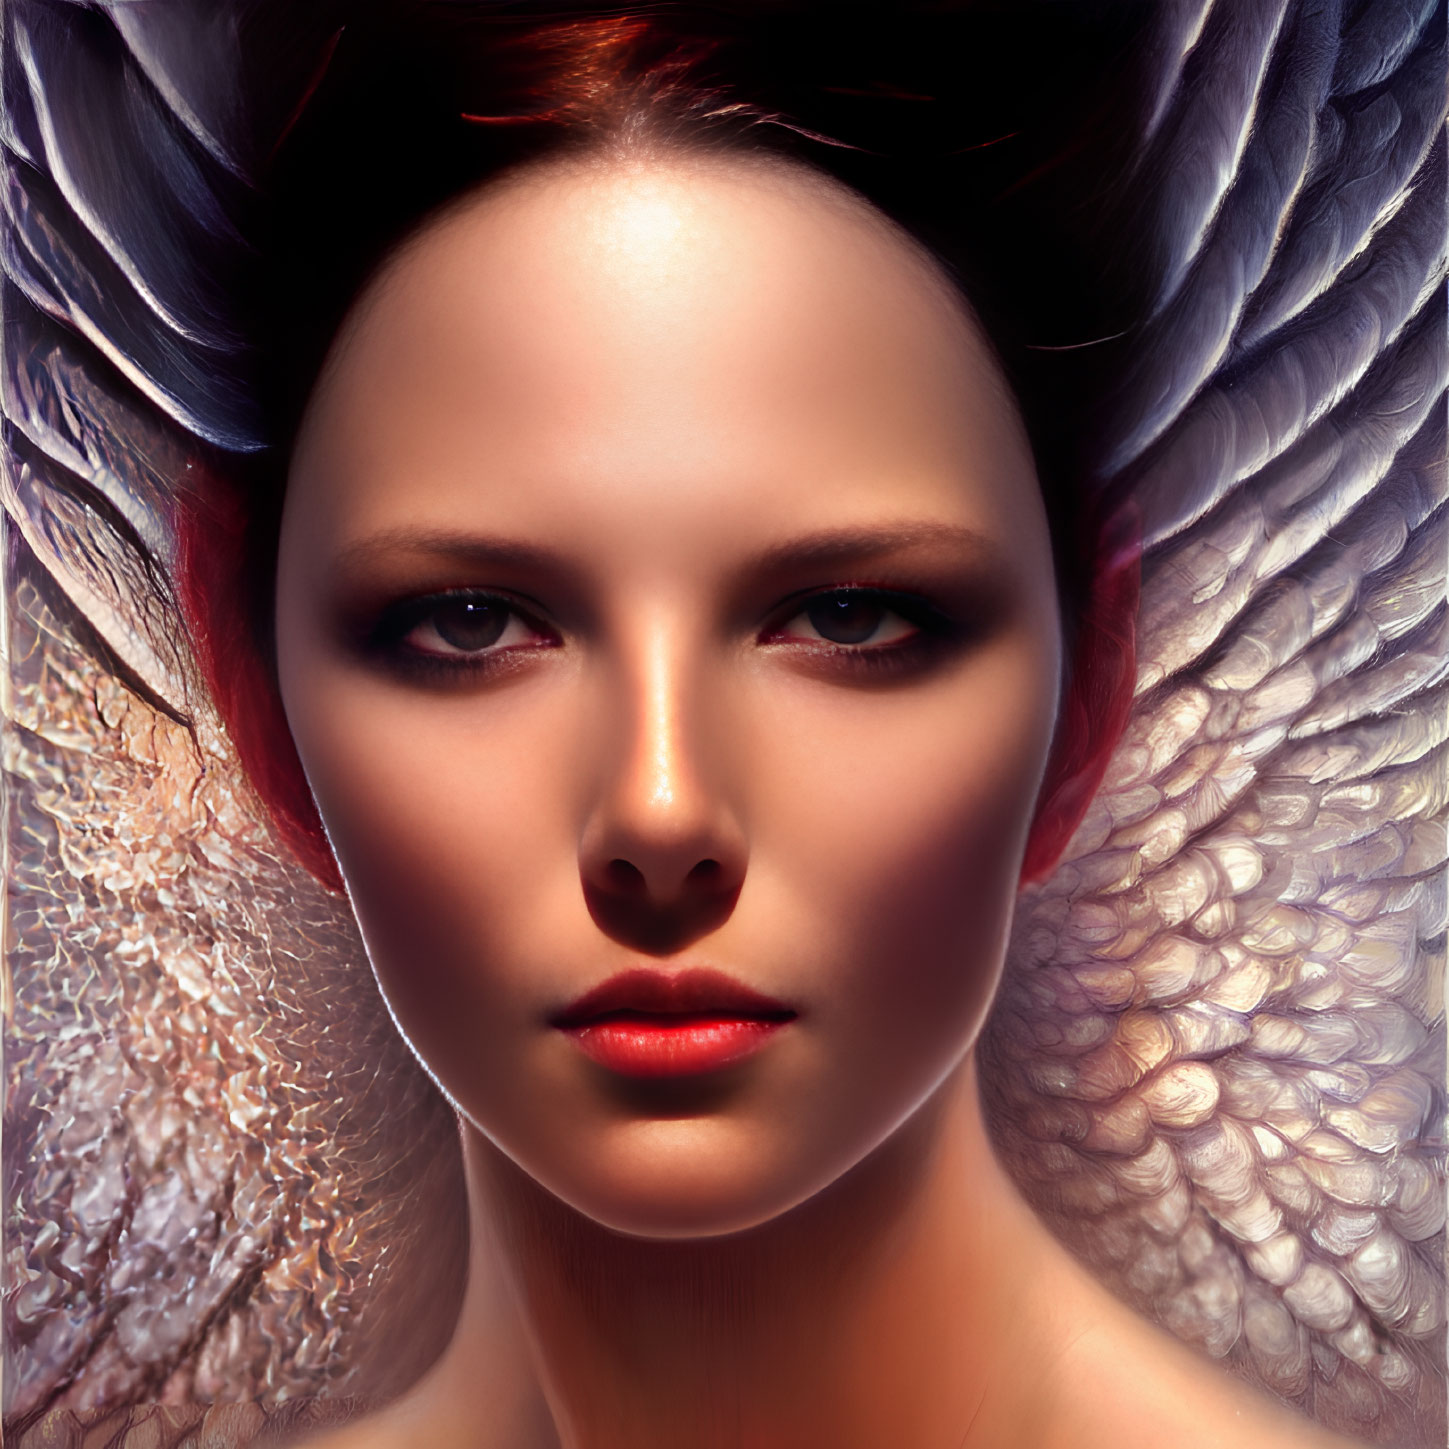 Symmetrical digital portrait of a woman with feather-like textures in white, brown, and black hues